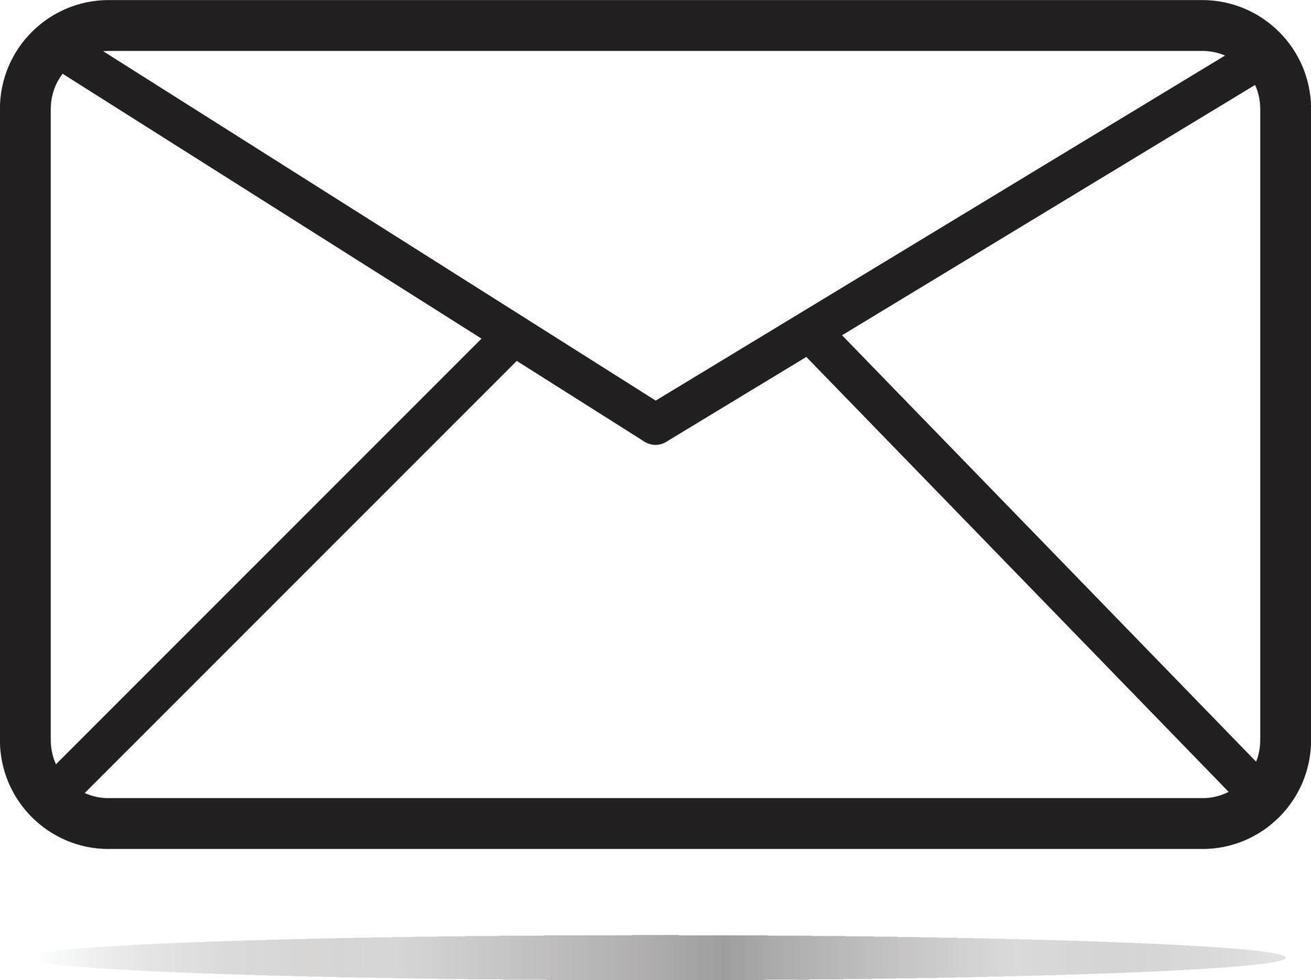 email icon. email sign. flat style. electronic mail symbol. vector